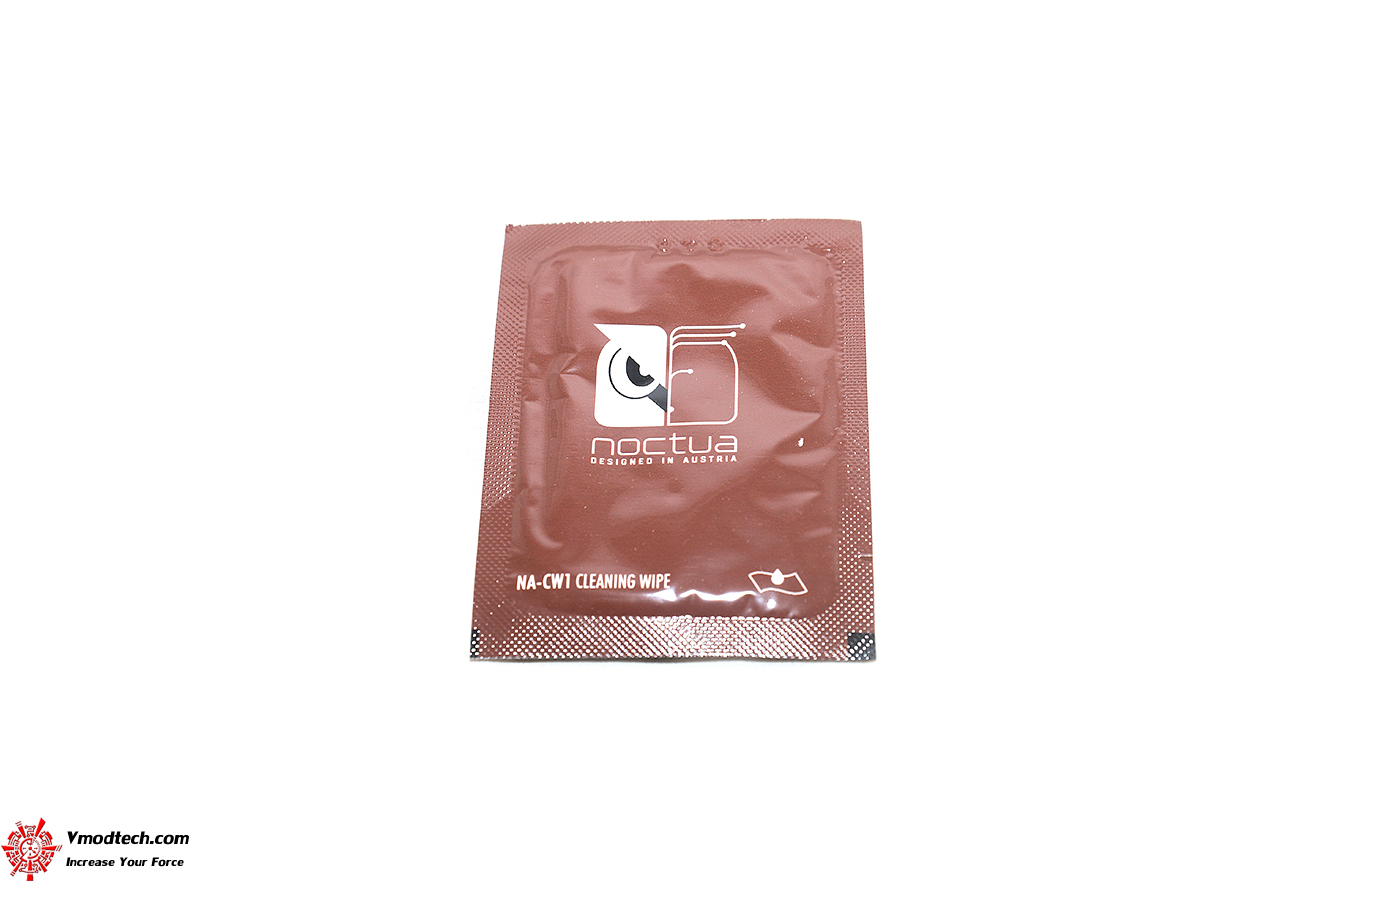 dsc 5011 NOCTUA NA SCW1 CLEANING WIPES REVIEW